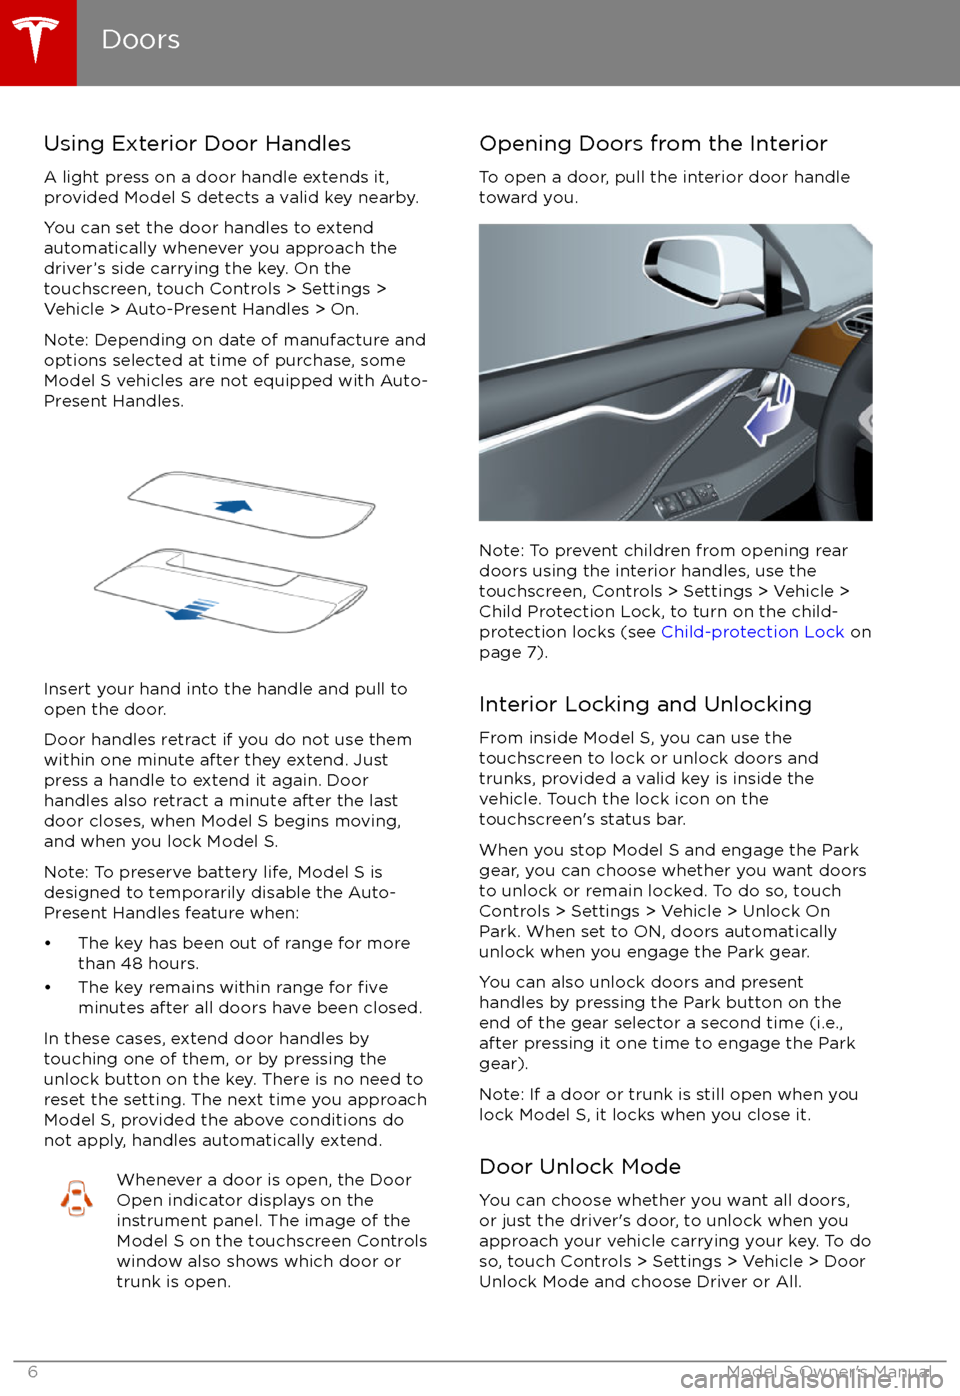 TESLA MODEL S 2017  Owners Manual Using Exterior Door HandlesA light press on a door handle extends it,
provided Model S detects a valid key nearby.
You can set the door handles to extend
automatically whenever you approach the
driver